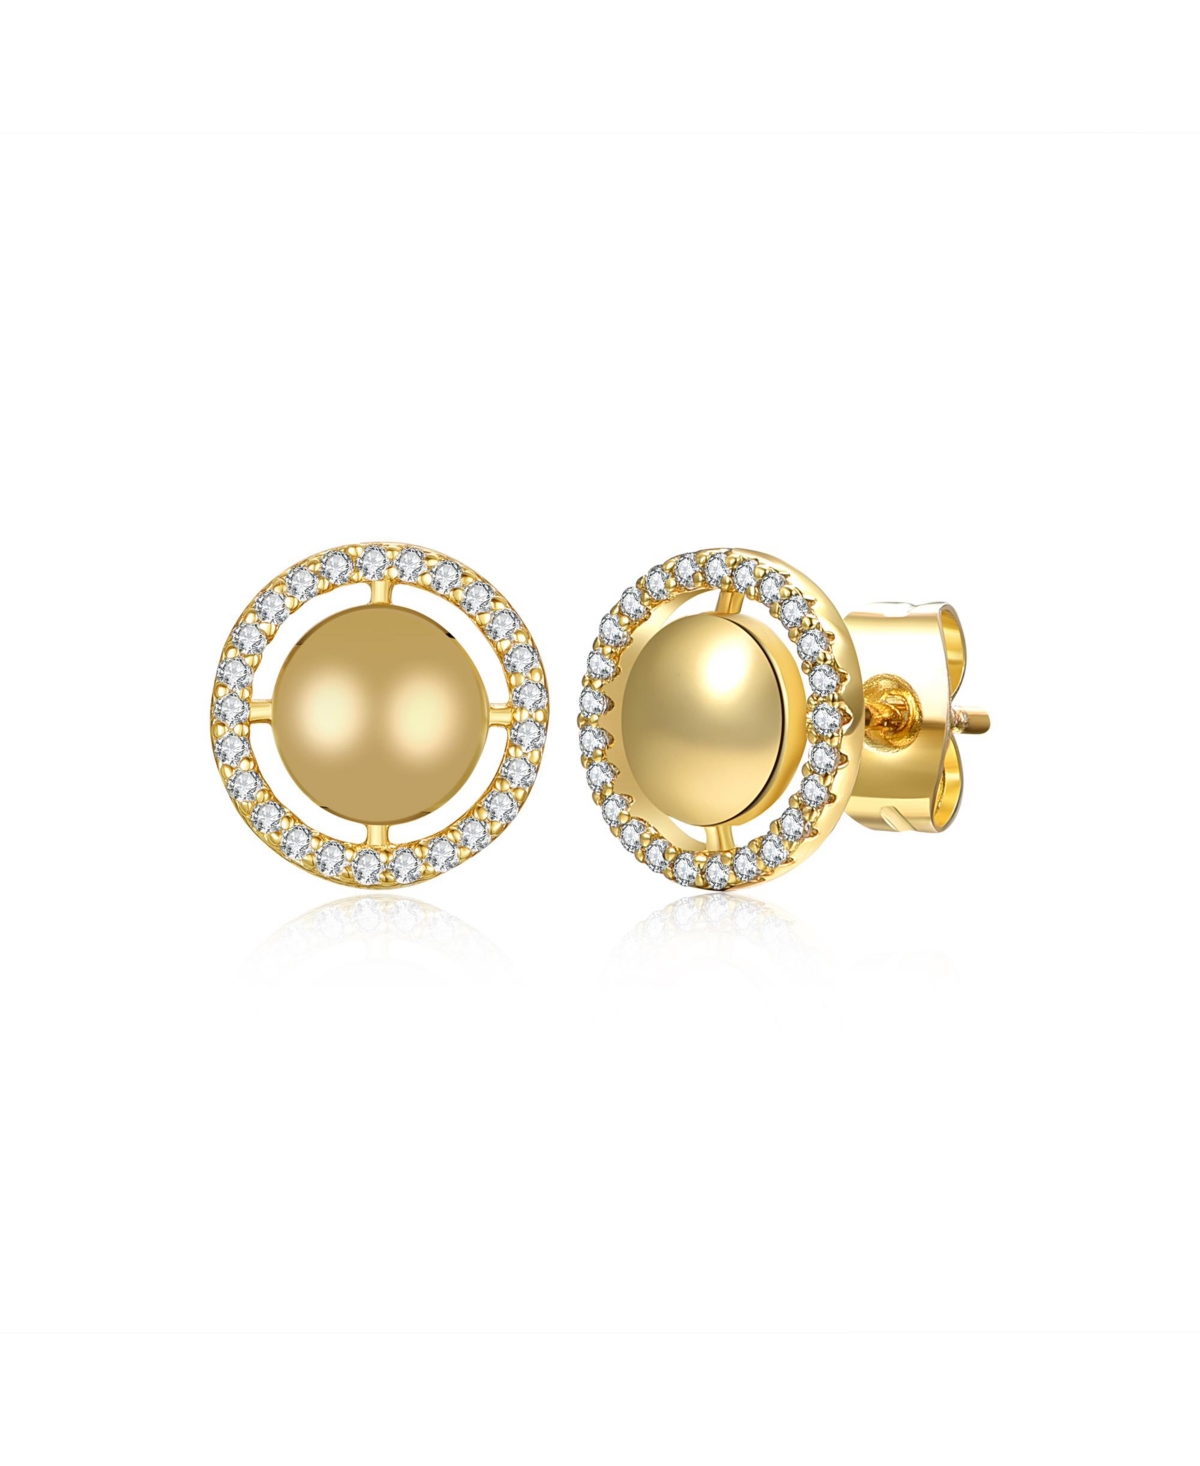 Radiant 14k Yellow Gold Plated Eternity Halo Medallion Stud Earrings with Cubic Zirconia - Gold